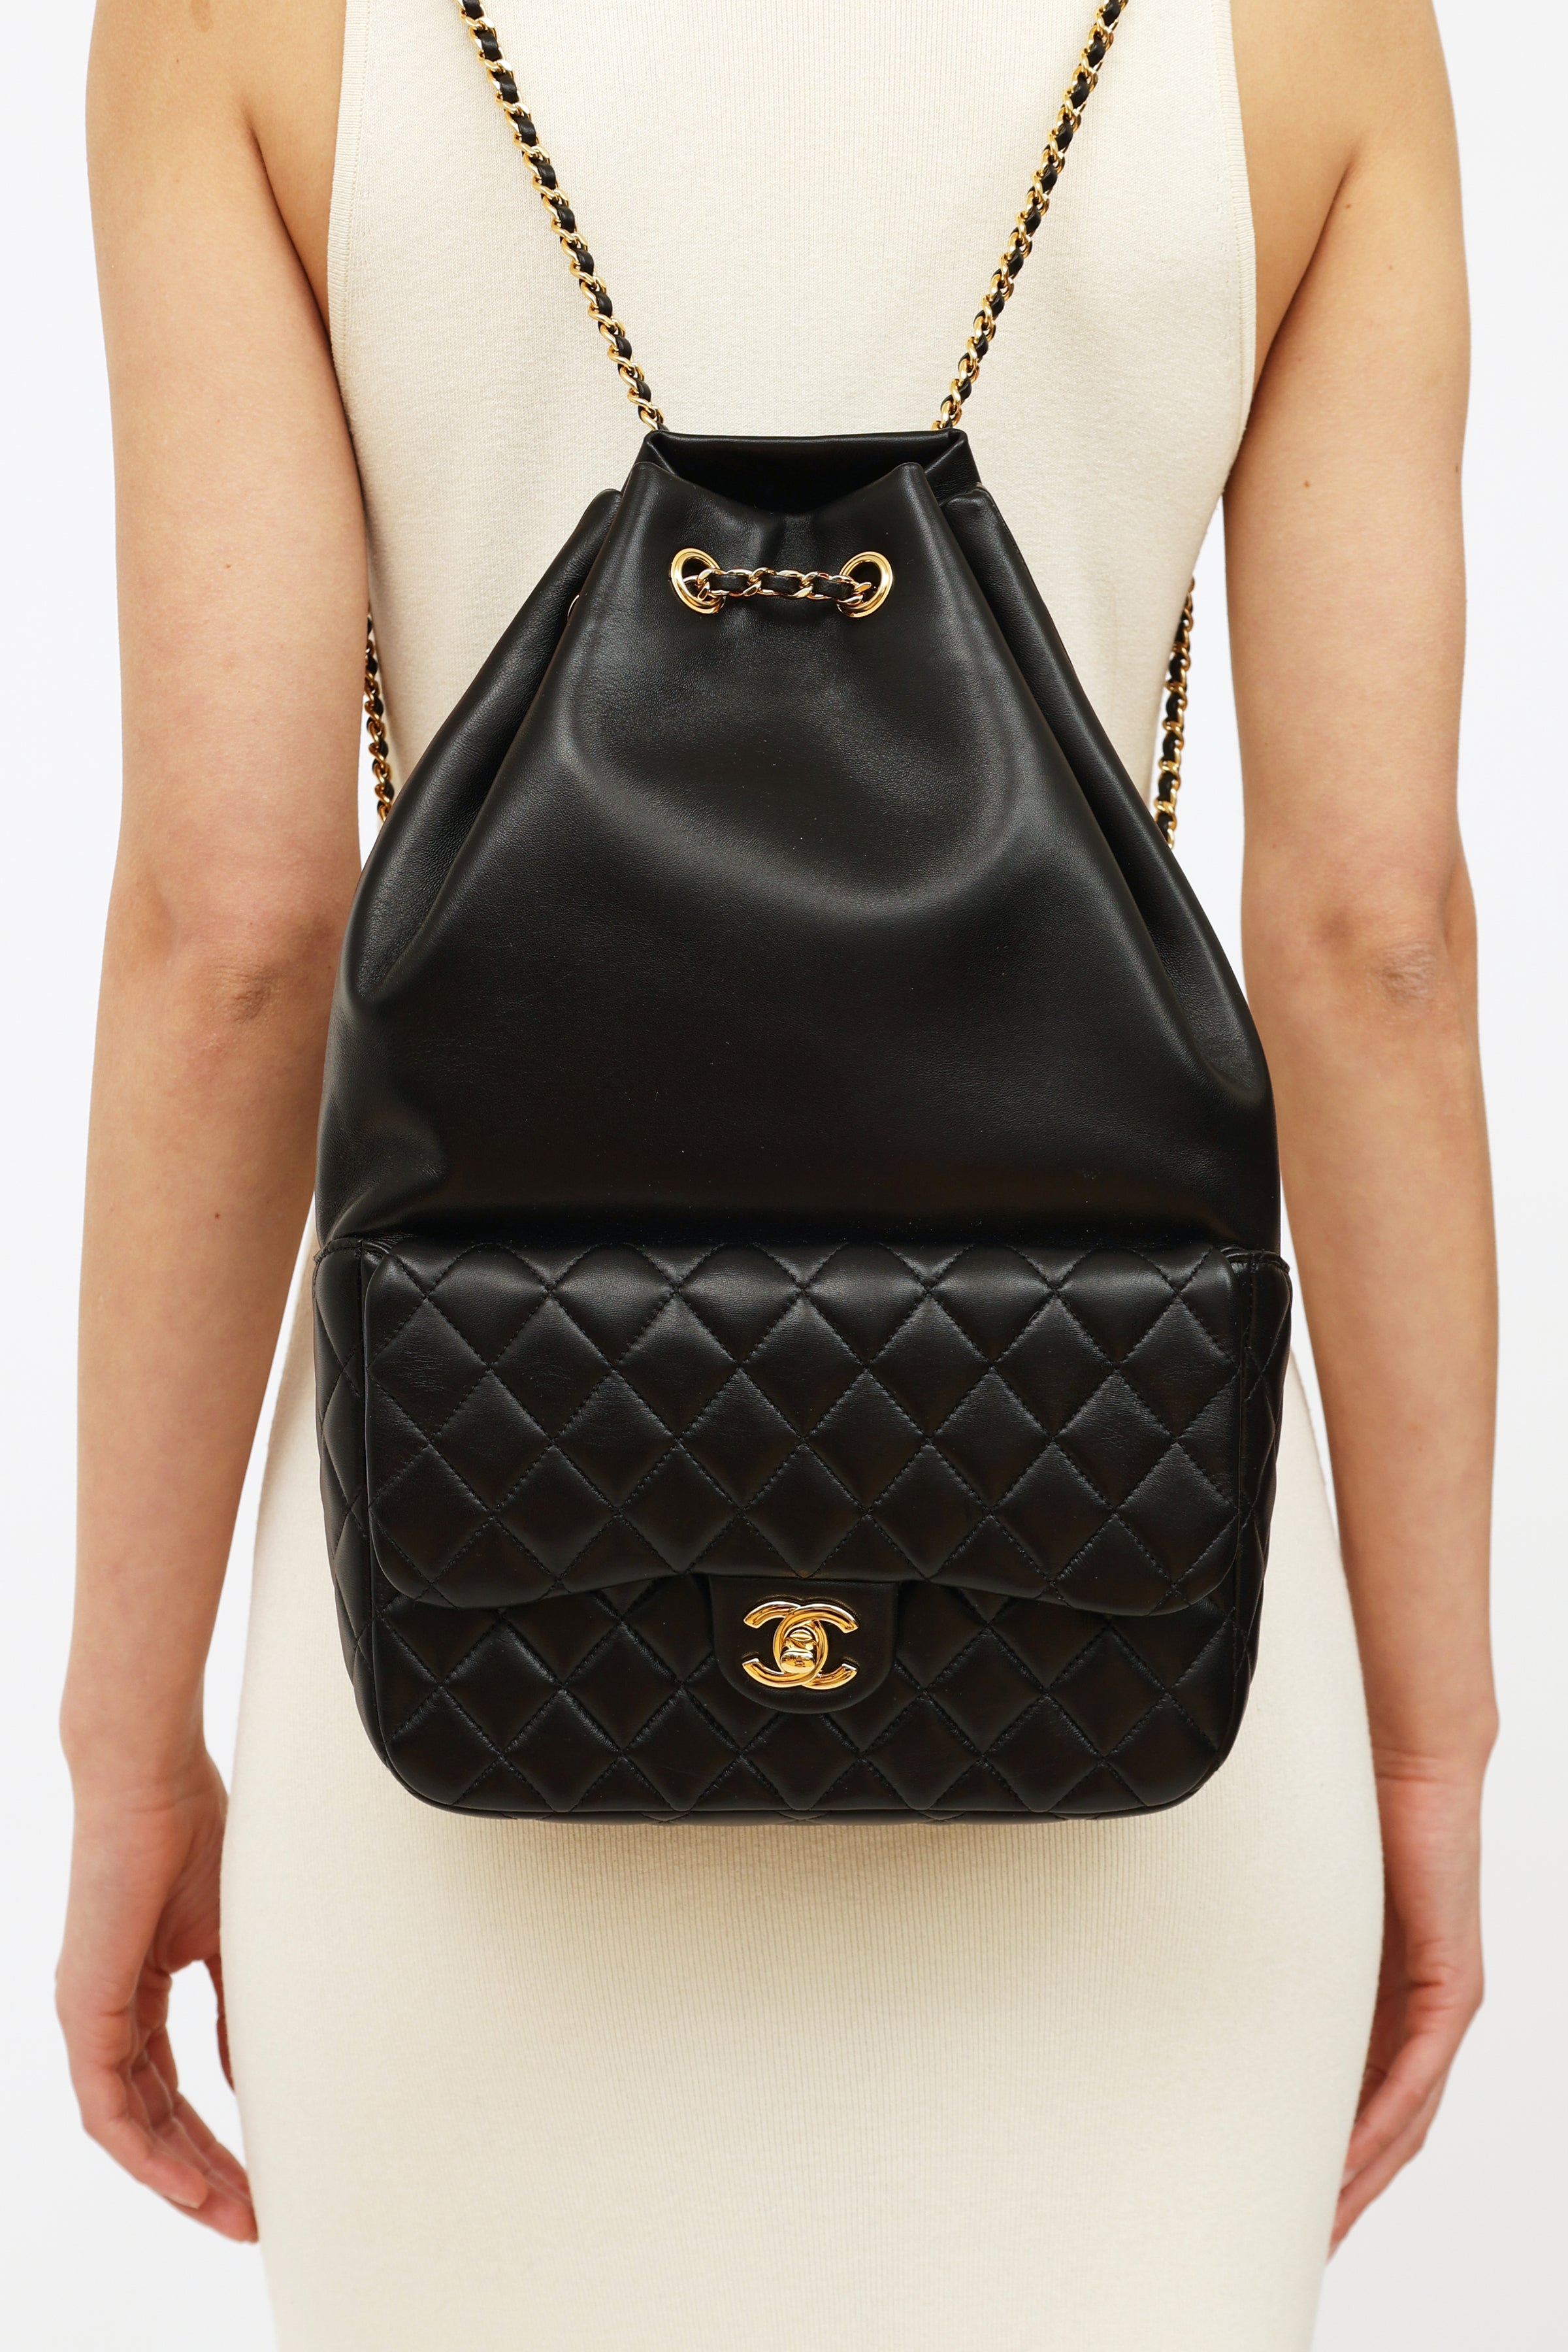 CHANEL Lambskin Quilted Large in Seoul Backpack Black 1291813